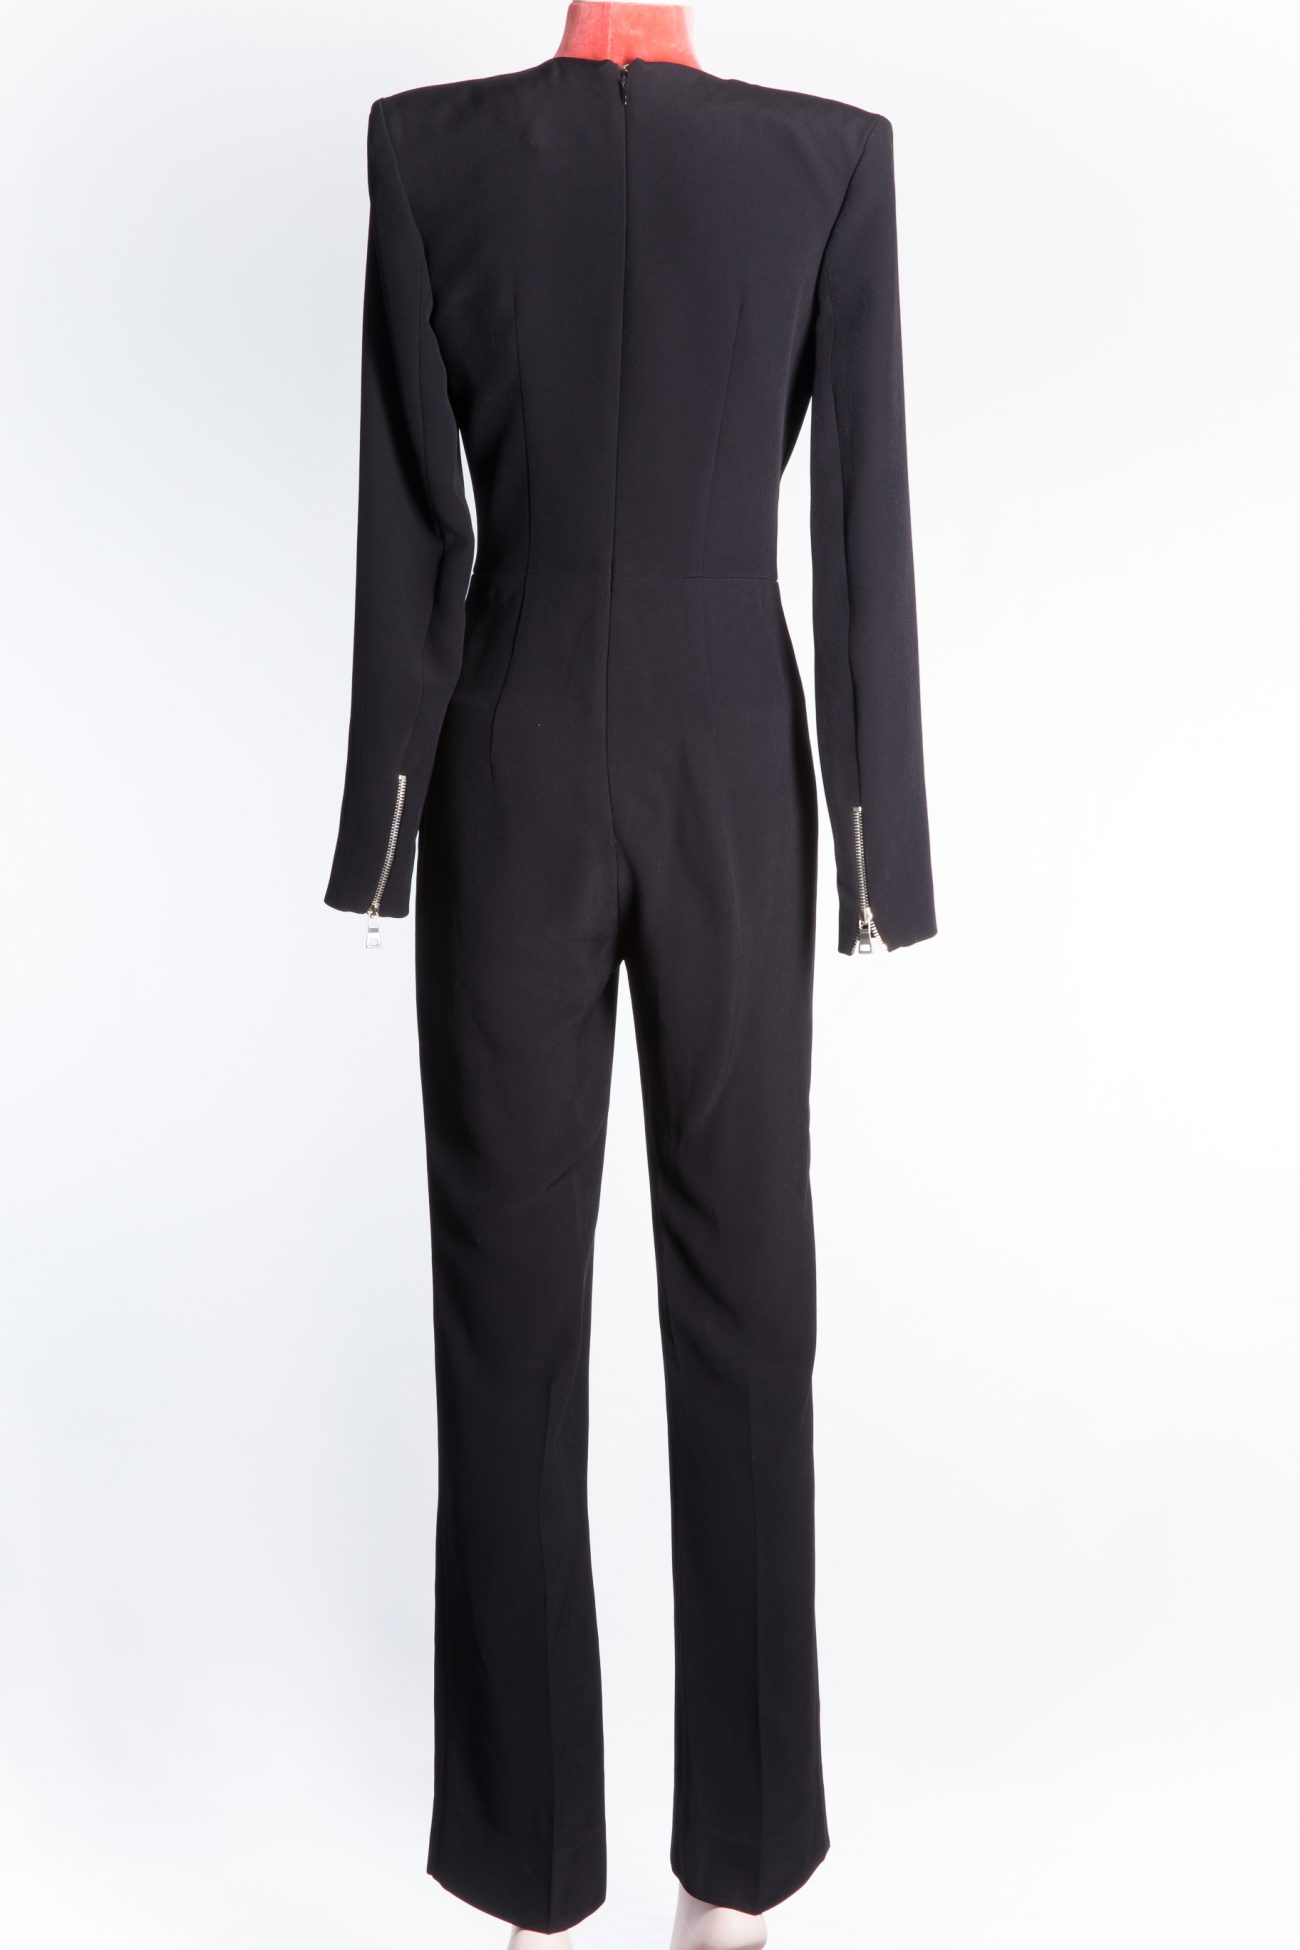 Balmain Double-Breasted Jumpsuit 